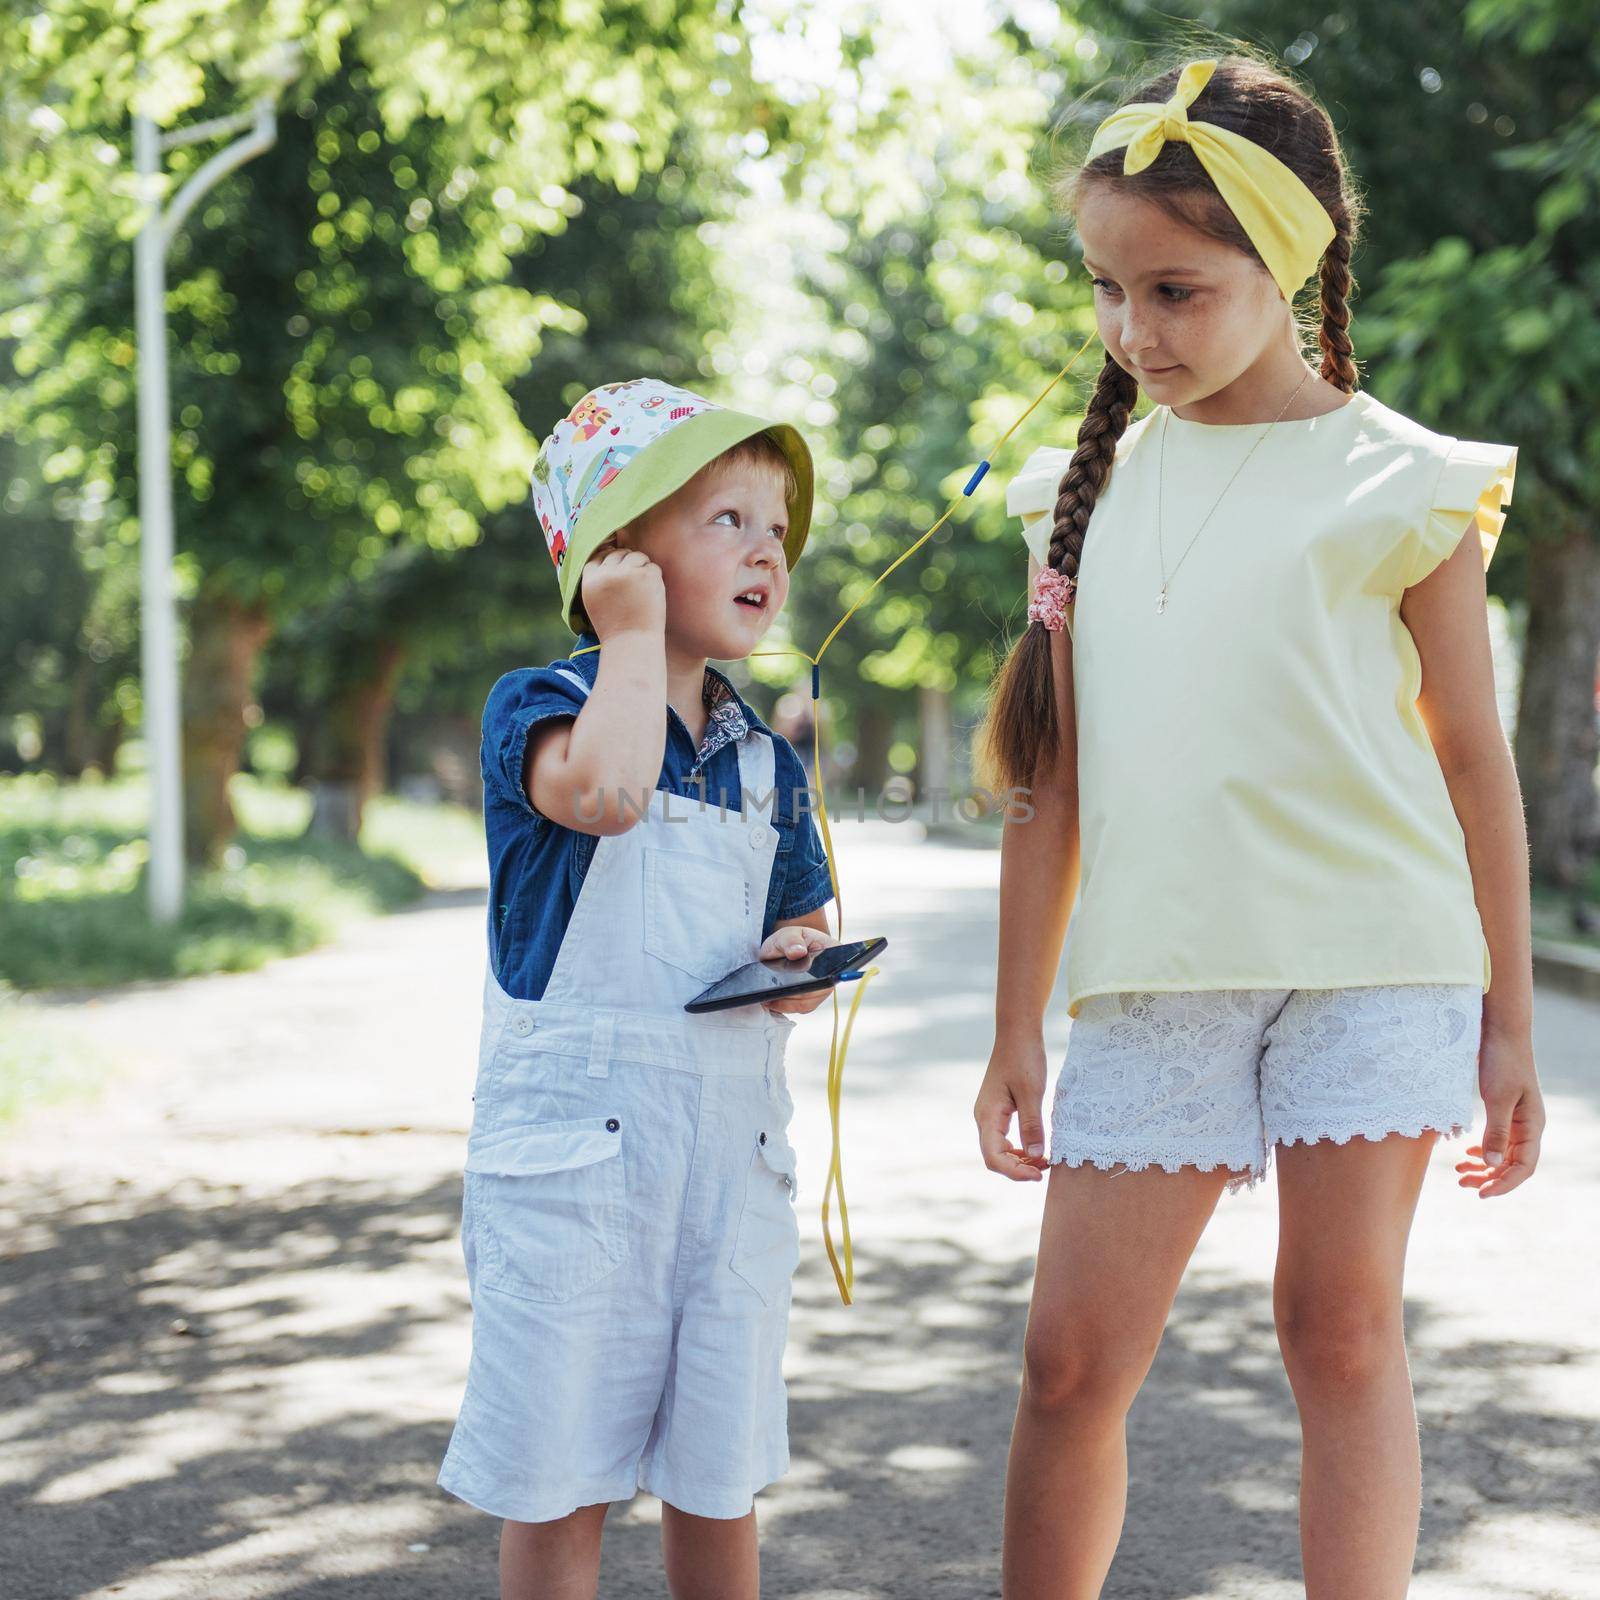 Cute girl and boy listening to music through headphones on the street.